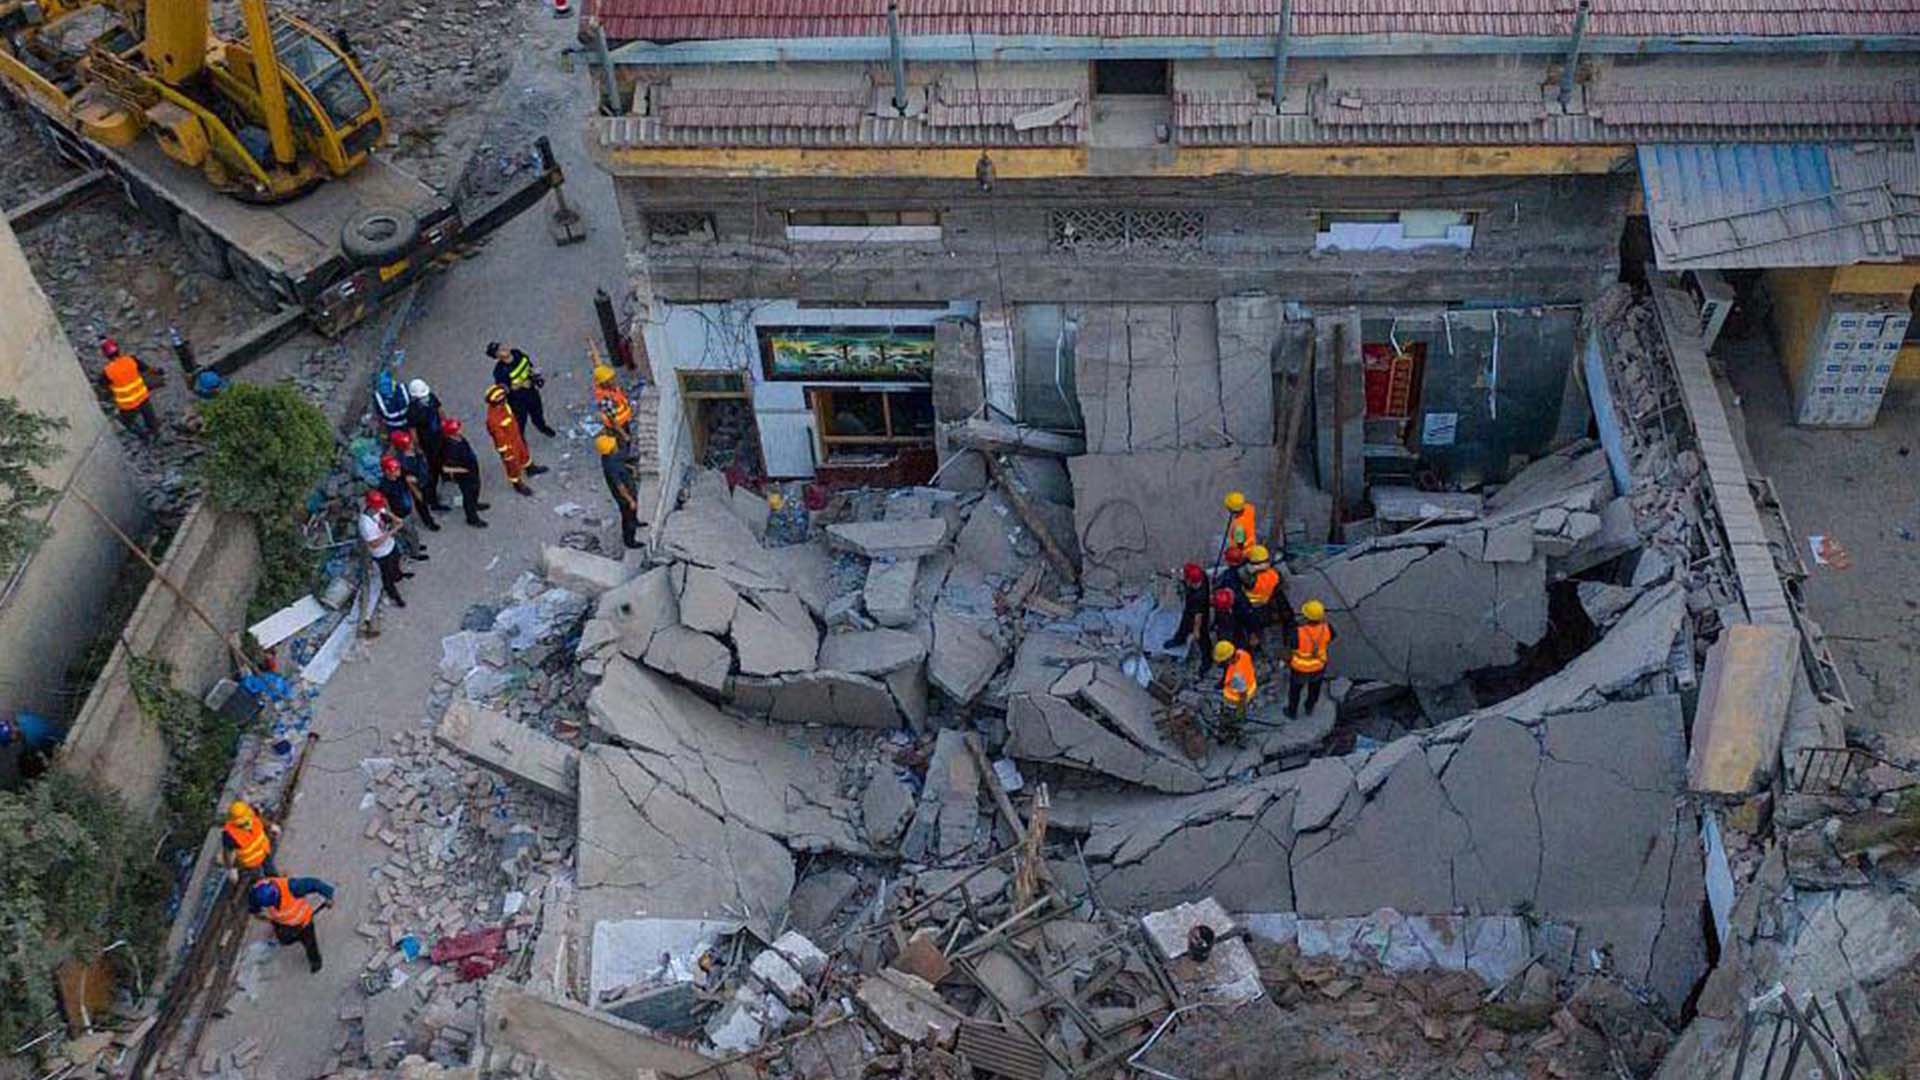 At least 29 dead, 7 seriously injured as restaurant collapses in N China